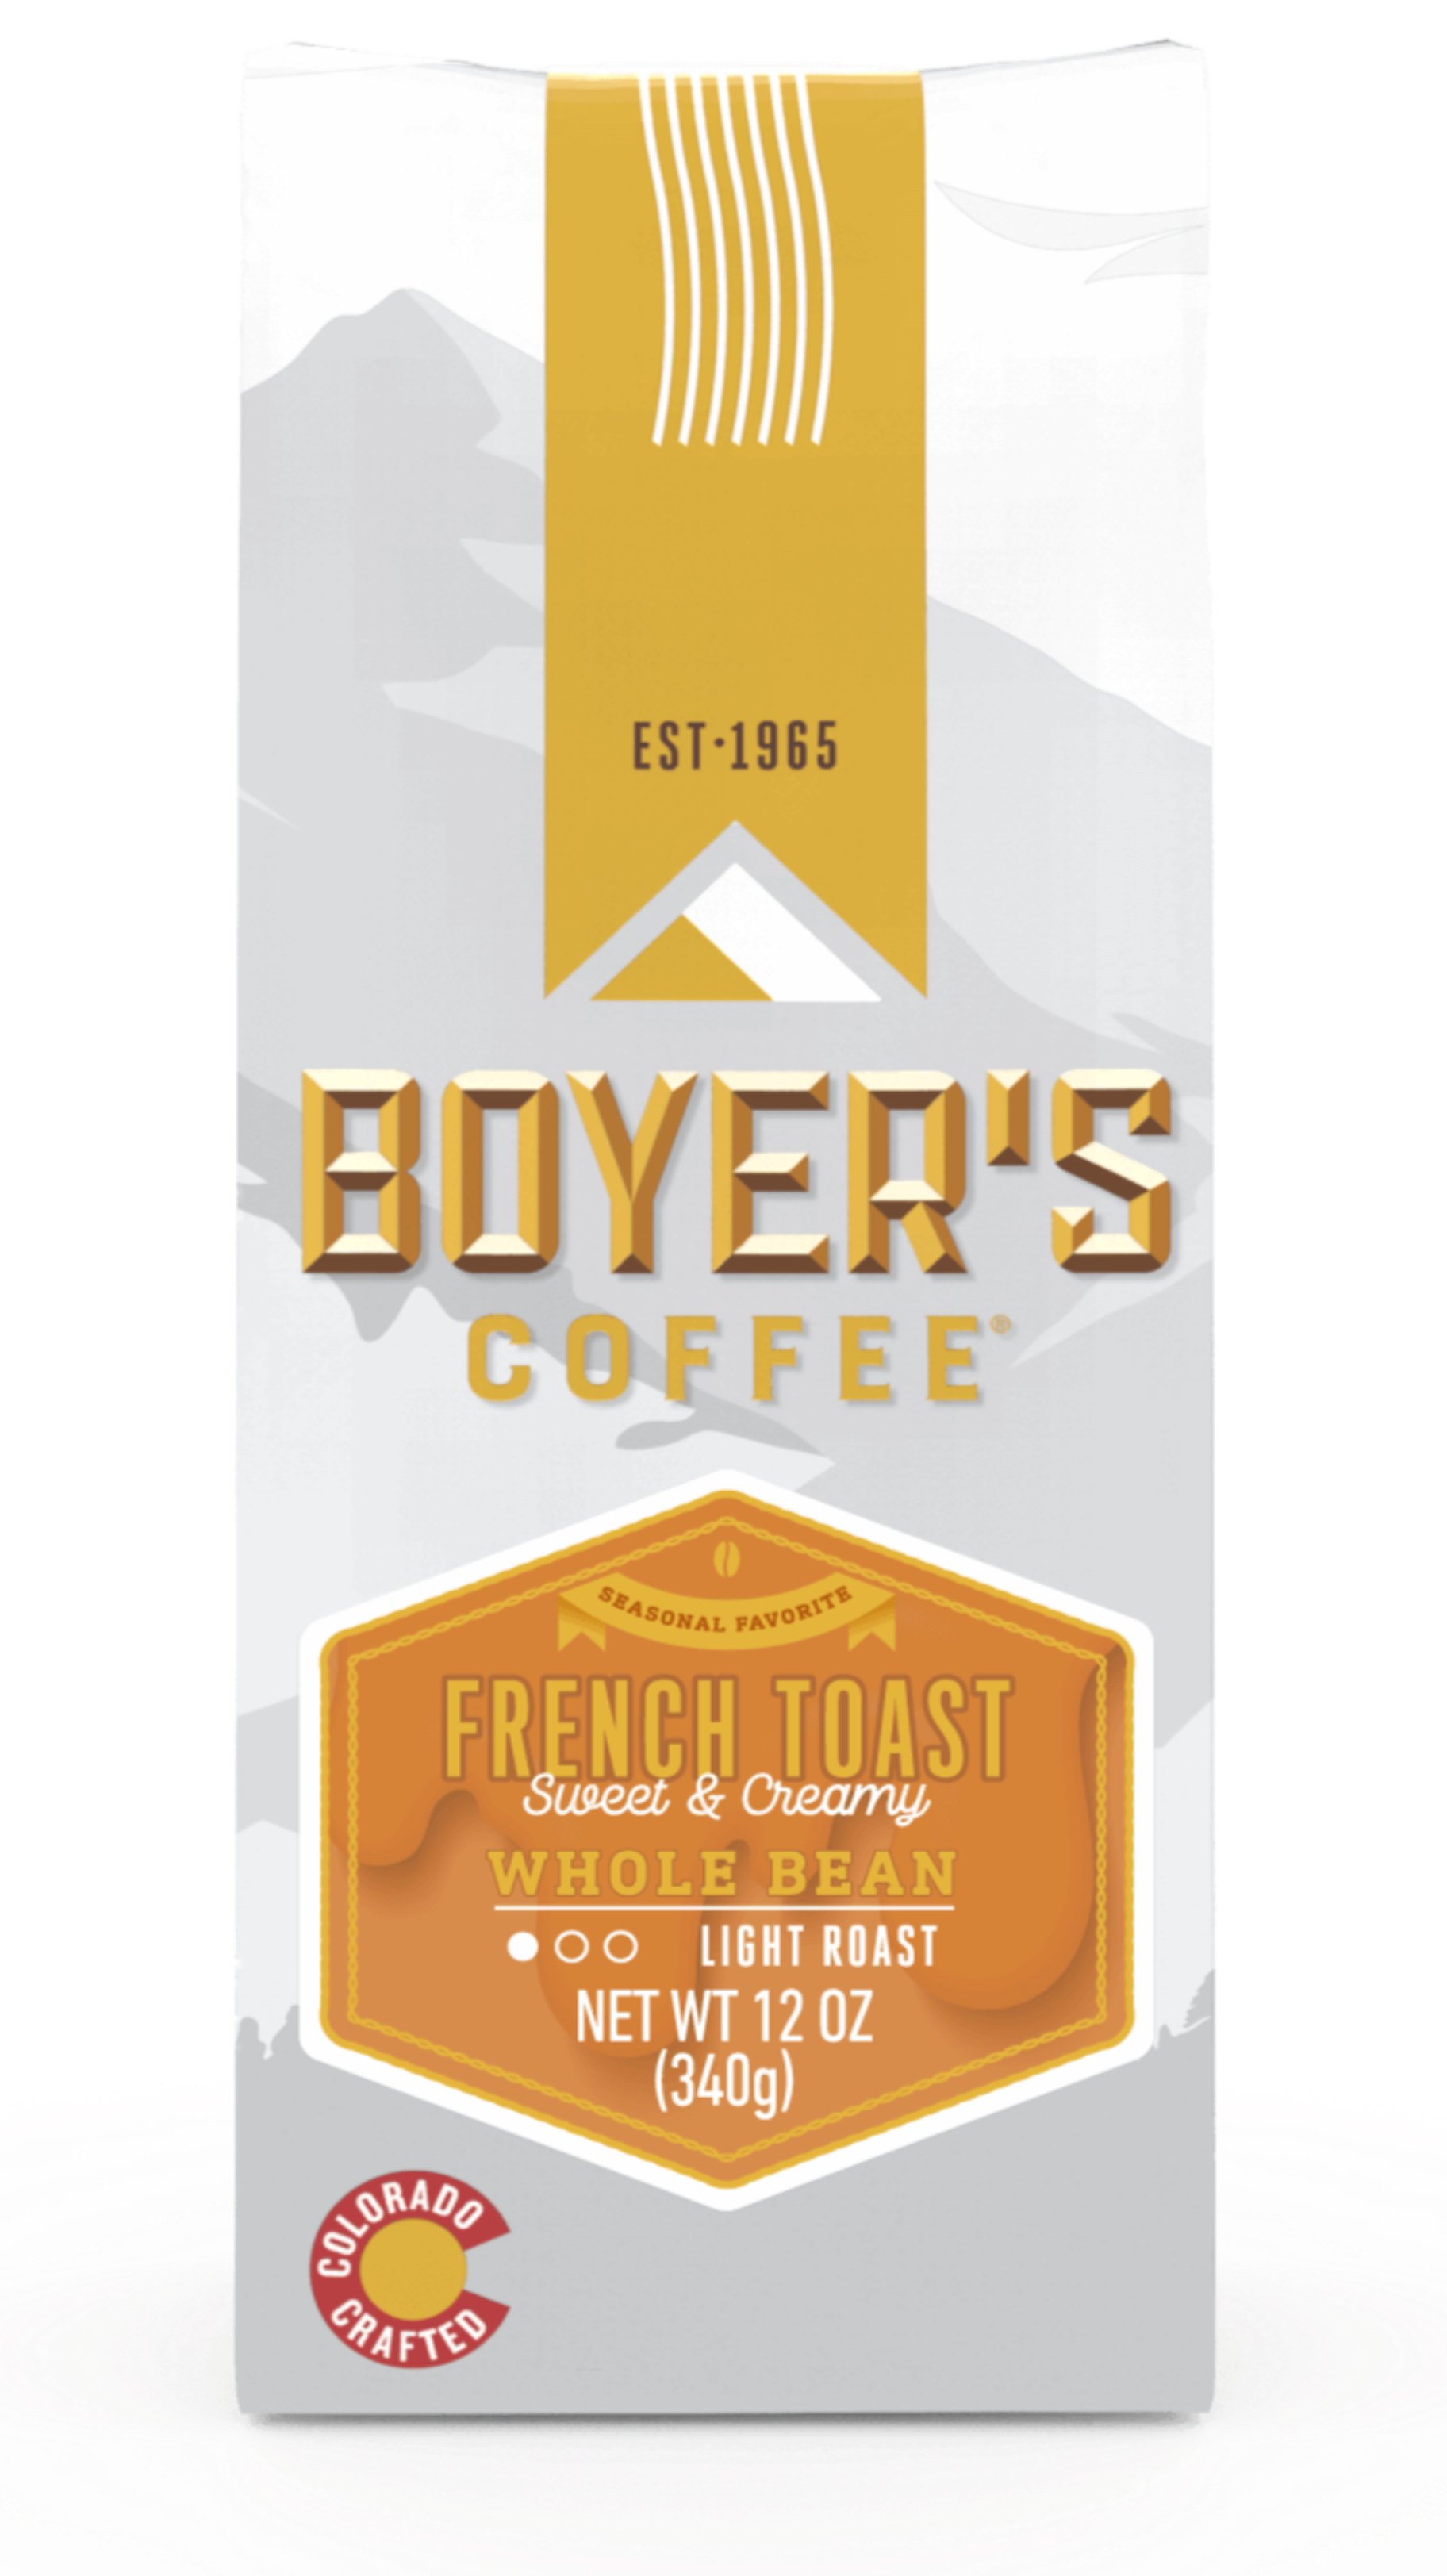 NEW! French Toast Coffee